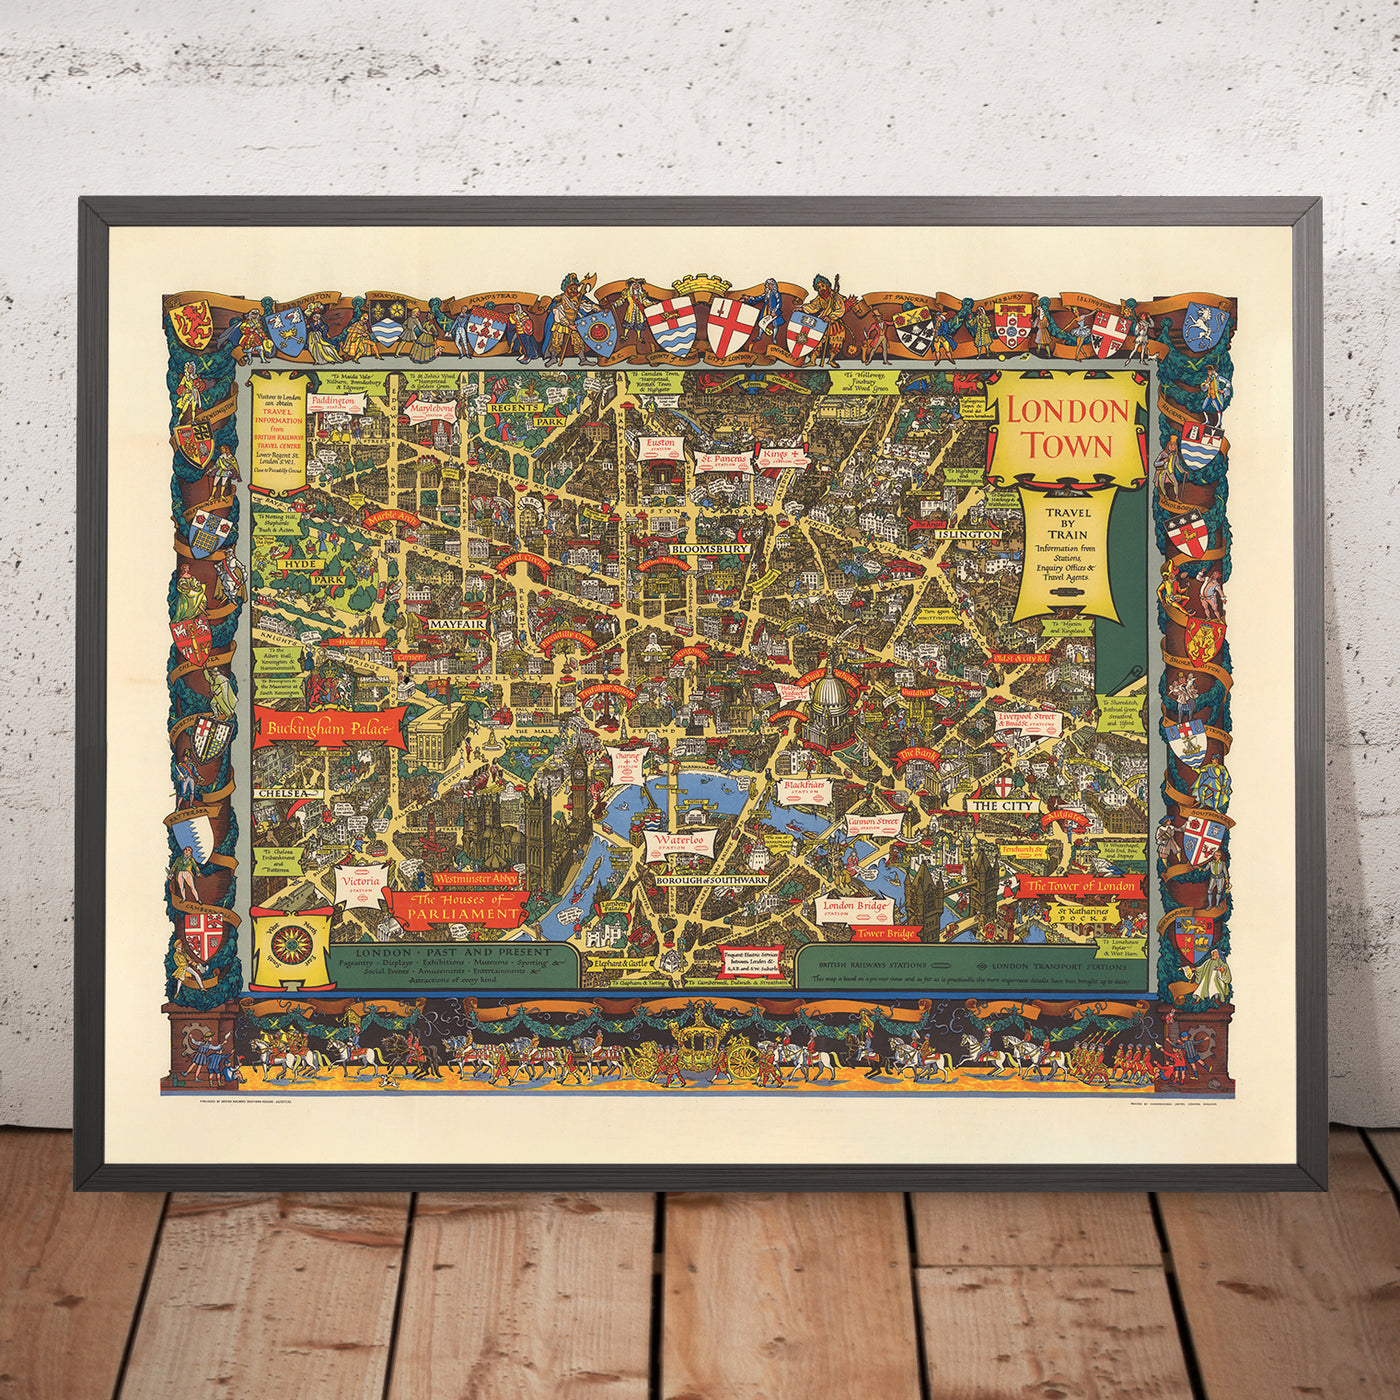 Old Pictorial Map of London Town by British Railways & Kerry Lee, 1953: Tower of London, Parliament, Buckingham Palace, St. Paul's Cathedral